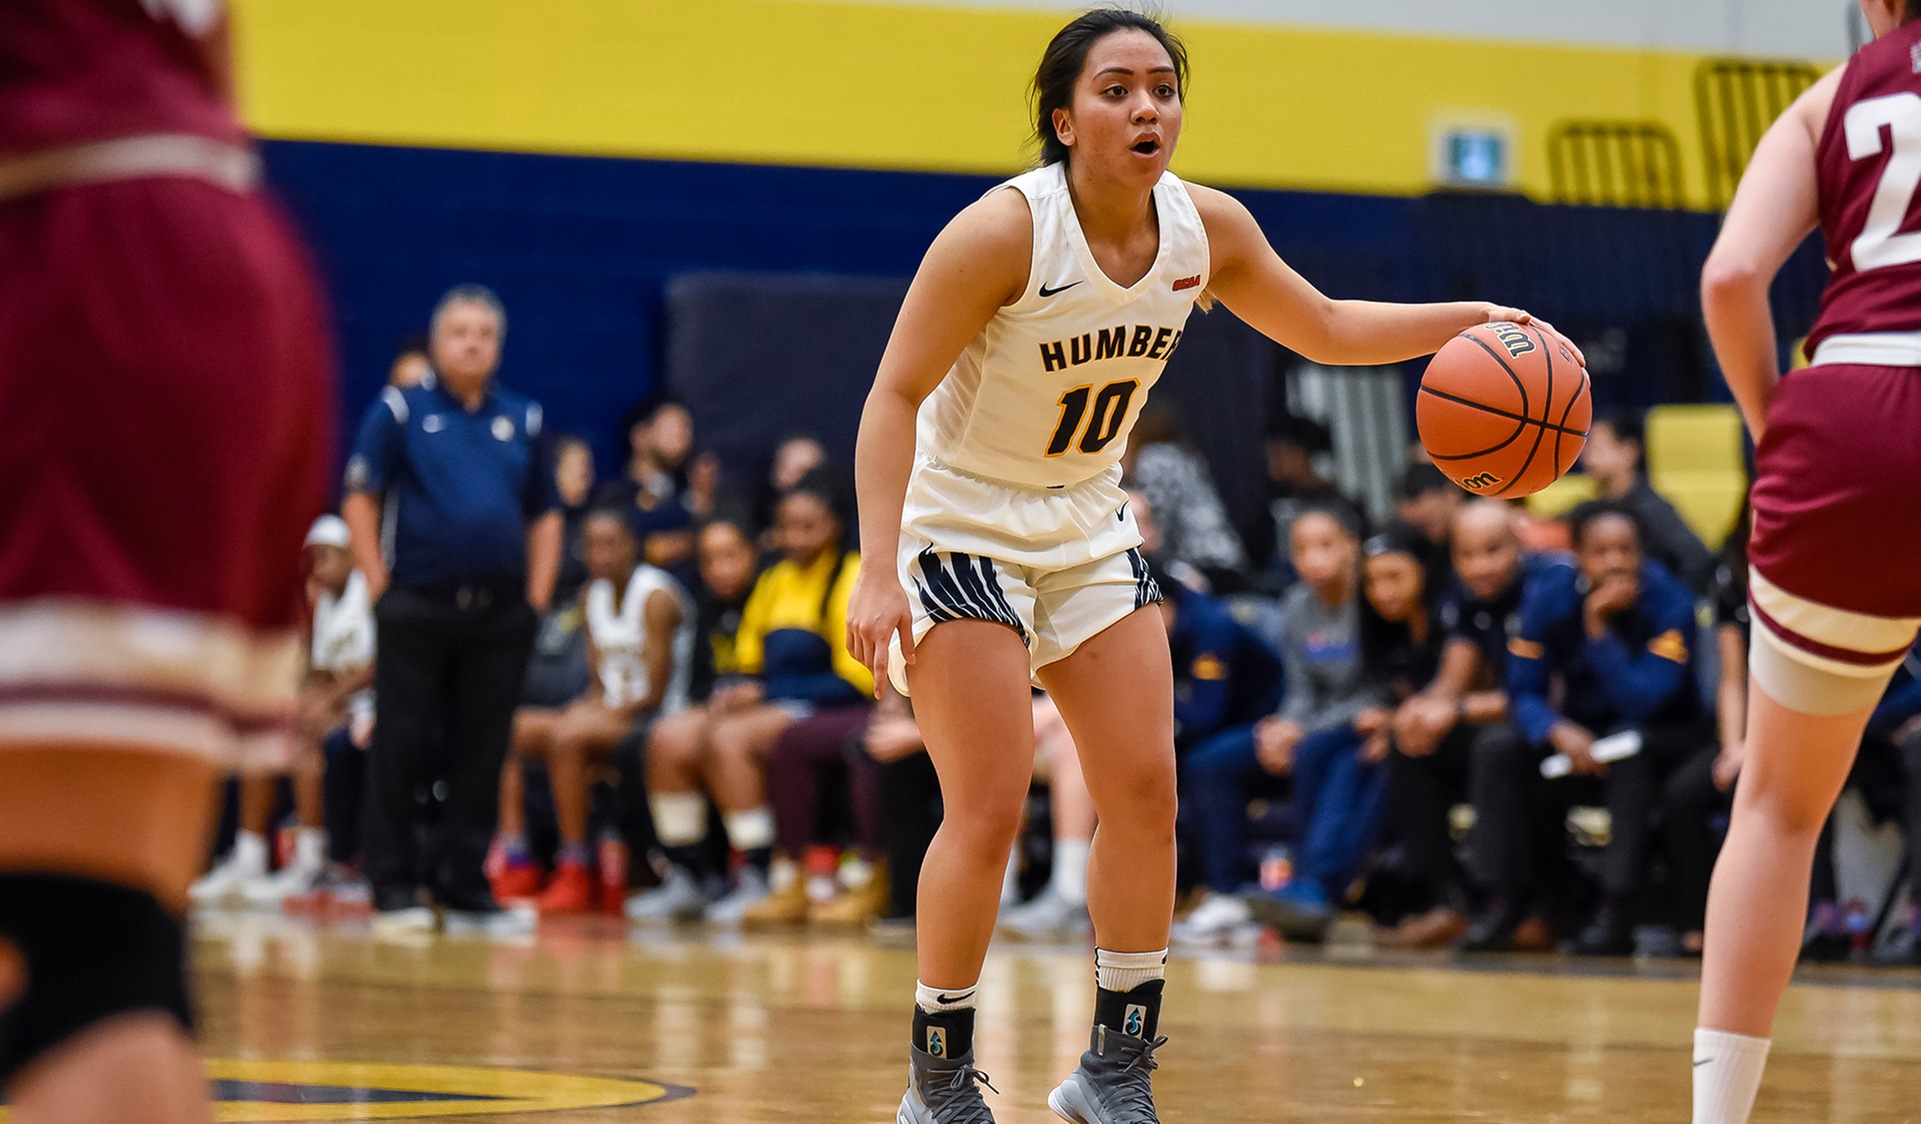 No. 11 WOMEN'S BASKETBALL HITS THE ROAD FOR SAULT